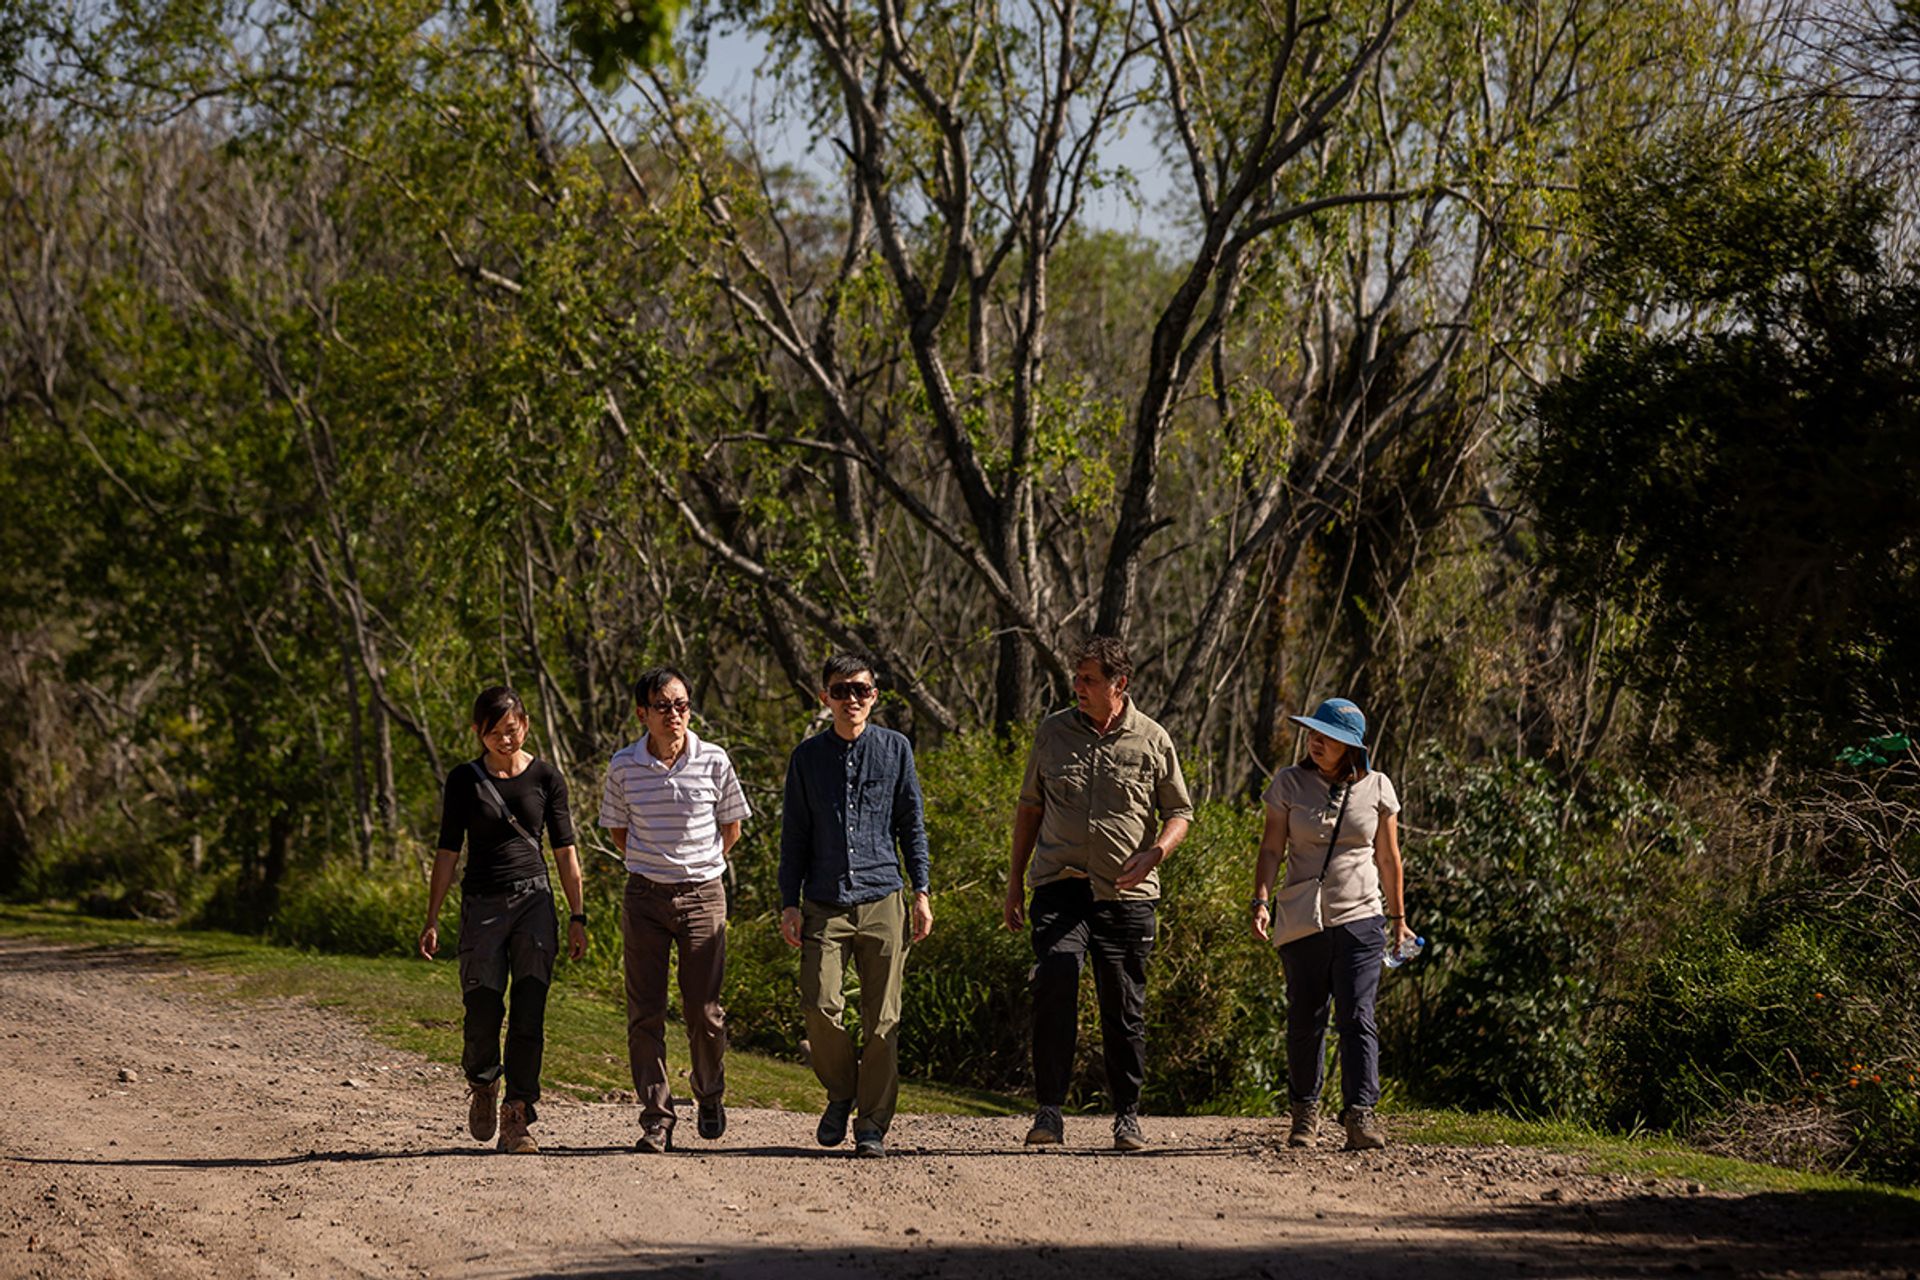 (From left to right) Ms Xue, Mr Loh, Mr Heng, Mr van der Schans and Ms Lee in Argentina’s Costanera Sur Ecological Reserve.